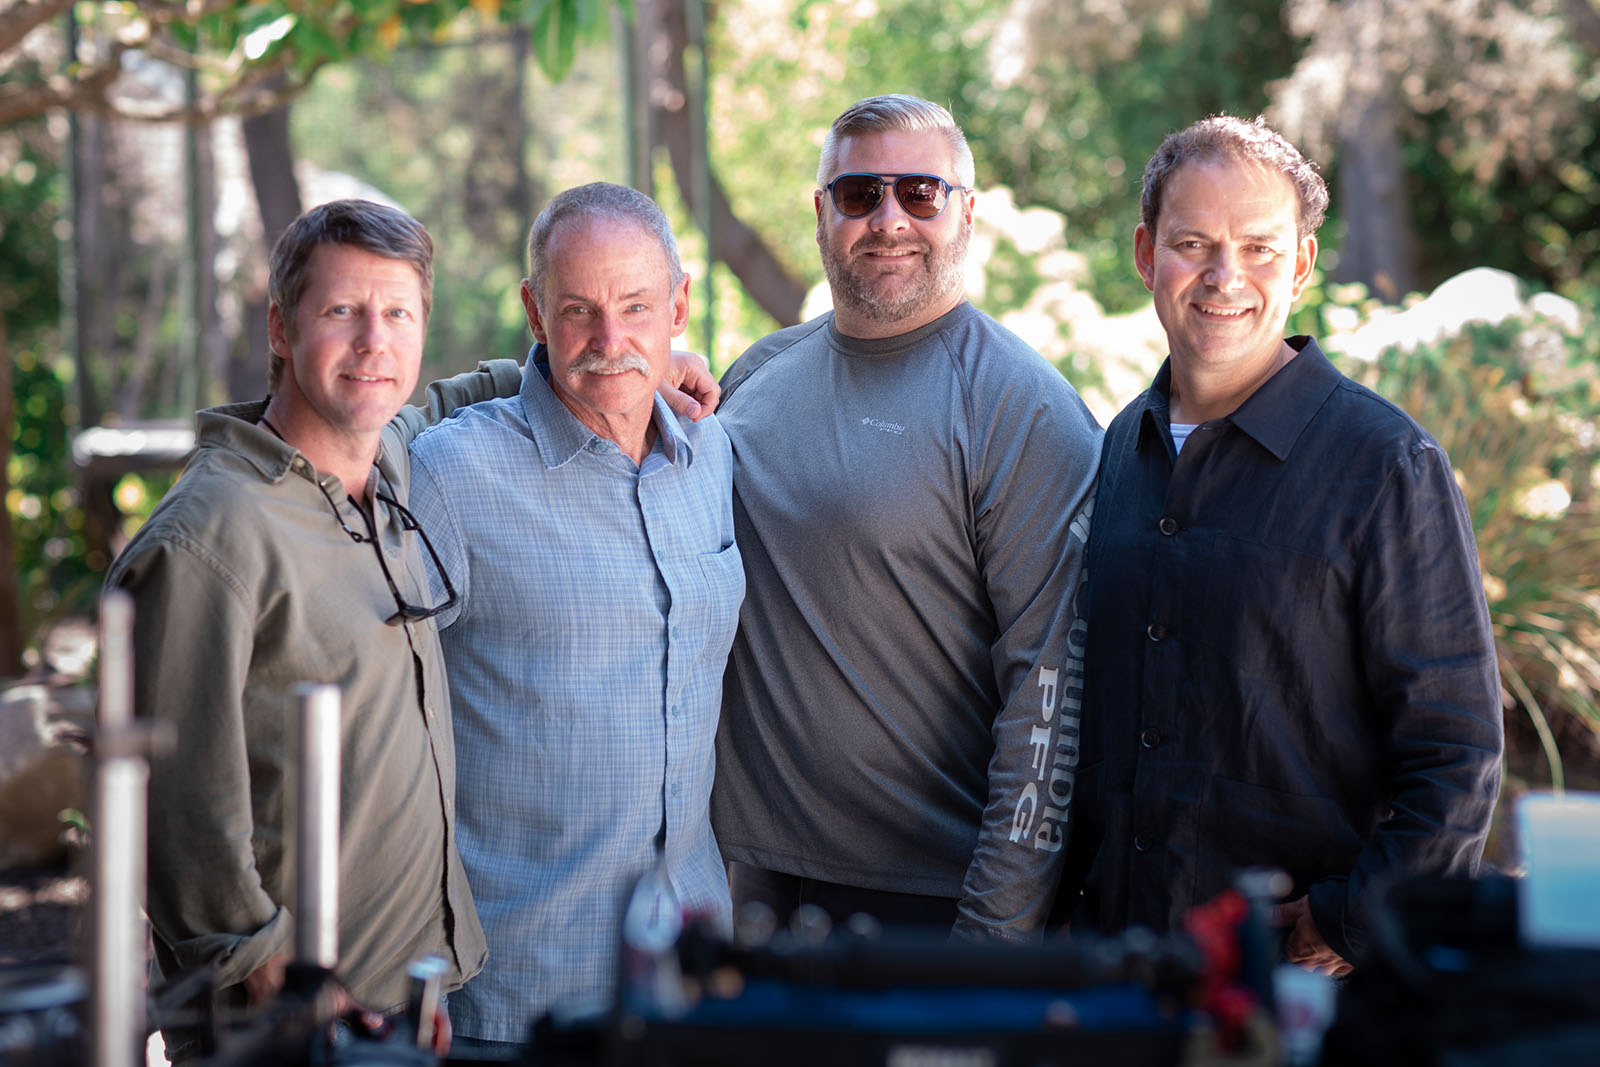 L-R: Cinematographer and V/SPEED co-founder Greg Wilson, pilot John Flanagan, V/SPEED co-founder Mike Knockenhauer, and Wildstar co-executive producer Mark Linfield.